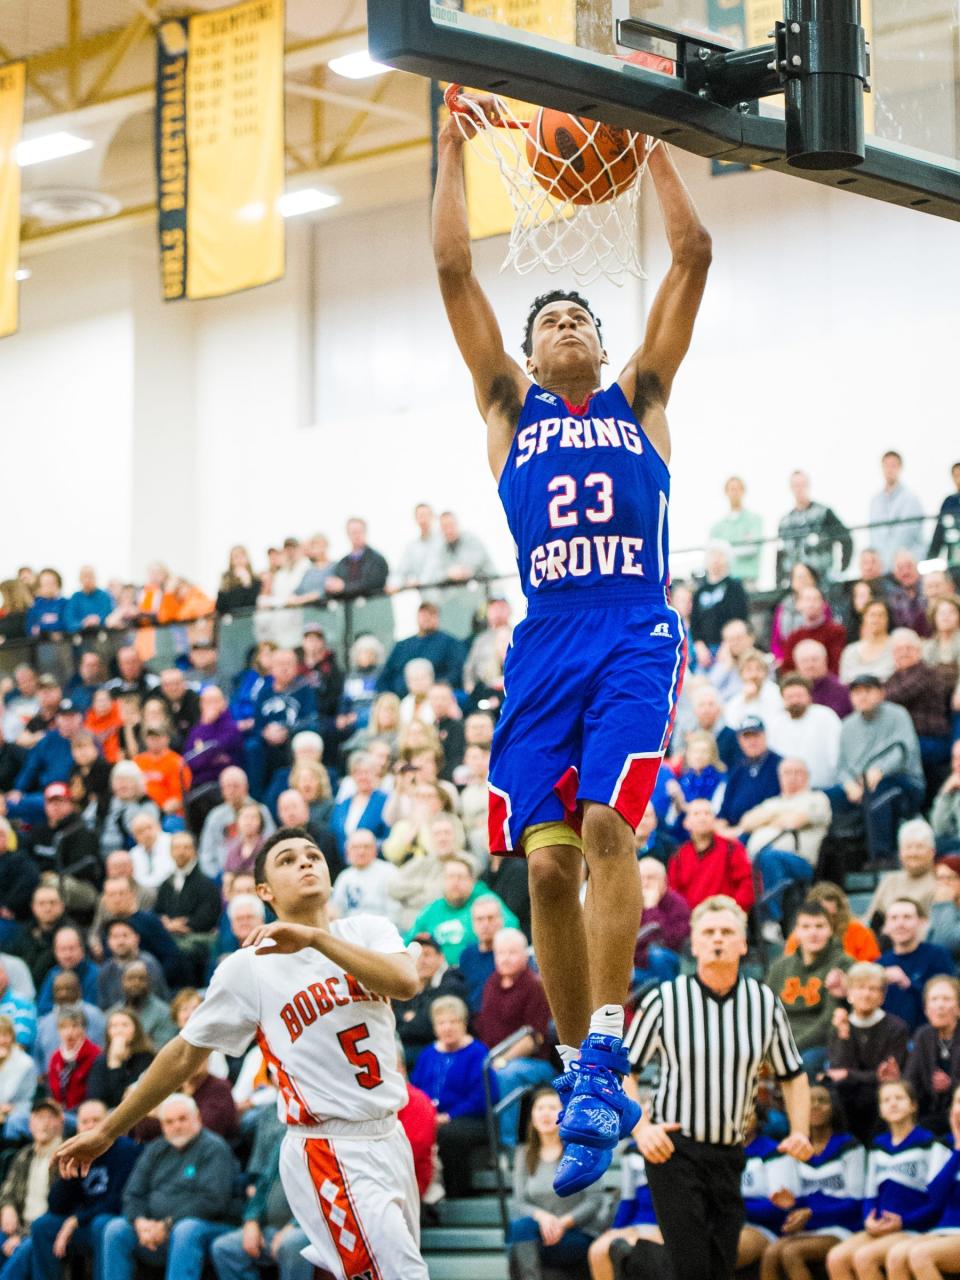 Spring Grove's Eli Brooks (23) completes a slam dunk on a fast break against Northeastern's Donovian Maxfield (5) in a YAIAA boys basketball semifinal game at Red Lion Area High School on Thursday, Feb. 11, 2016. Spring Grove won 59-57.